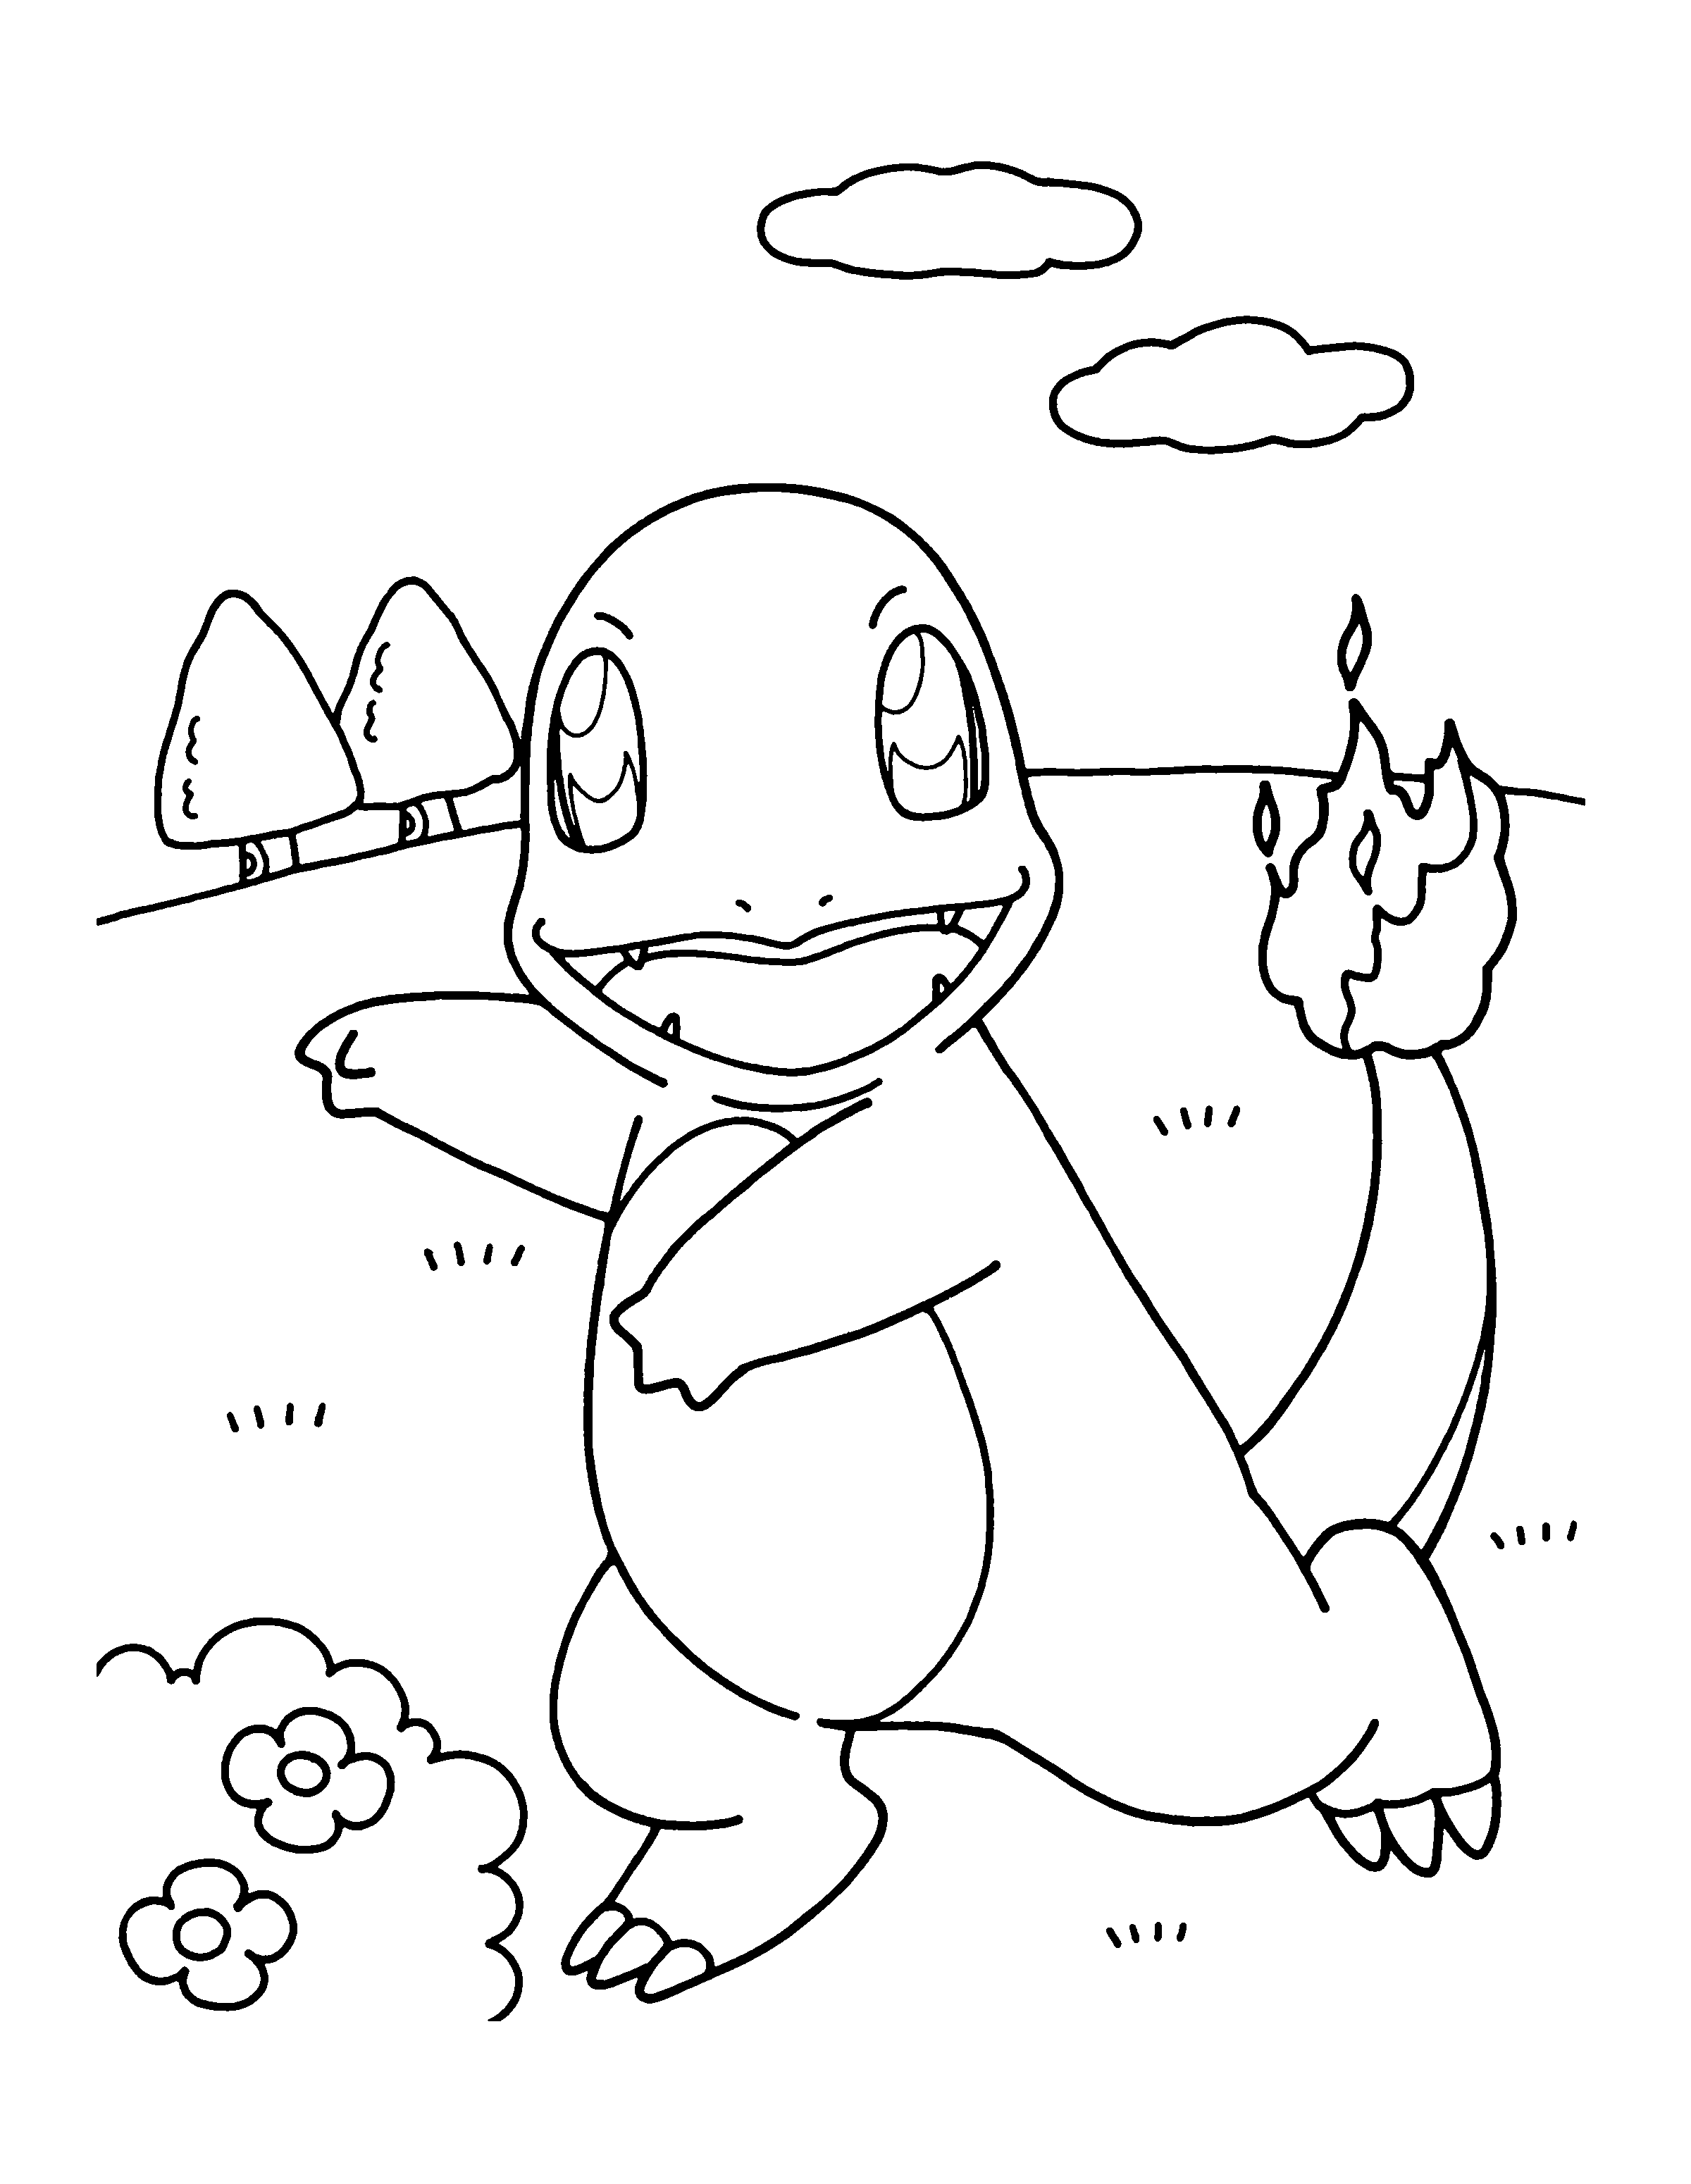 Pokemon Coloring Pages Pdf   Coloring Home